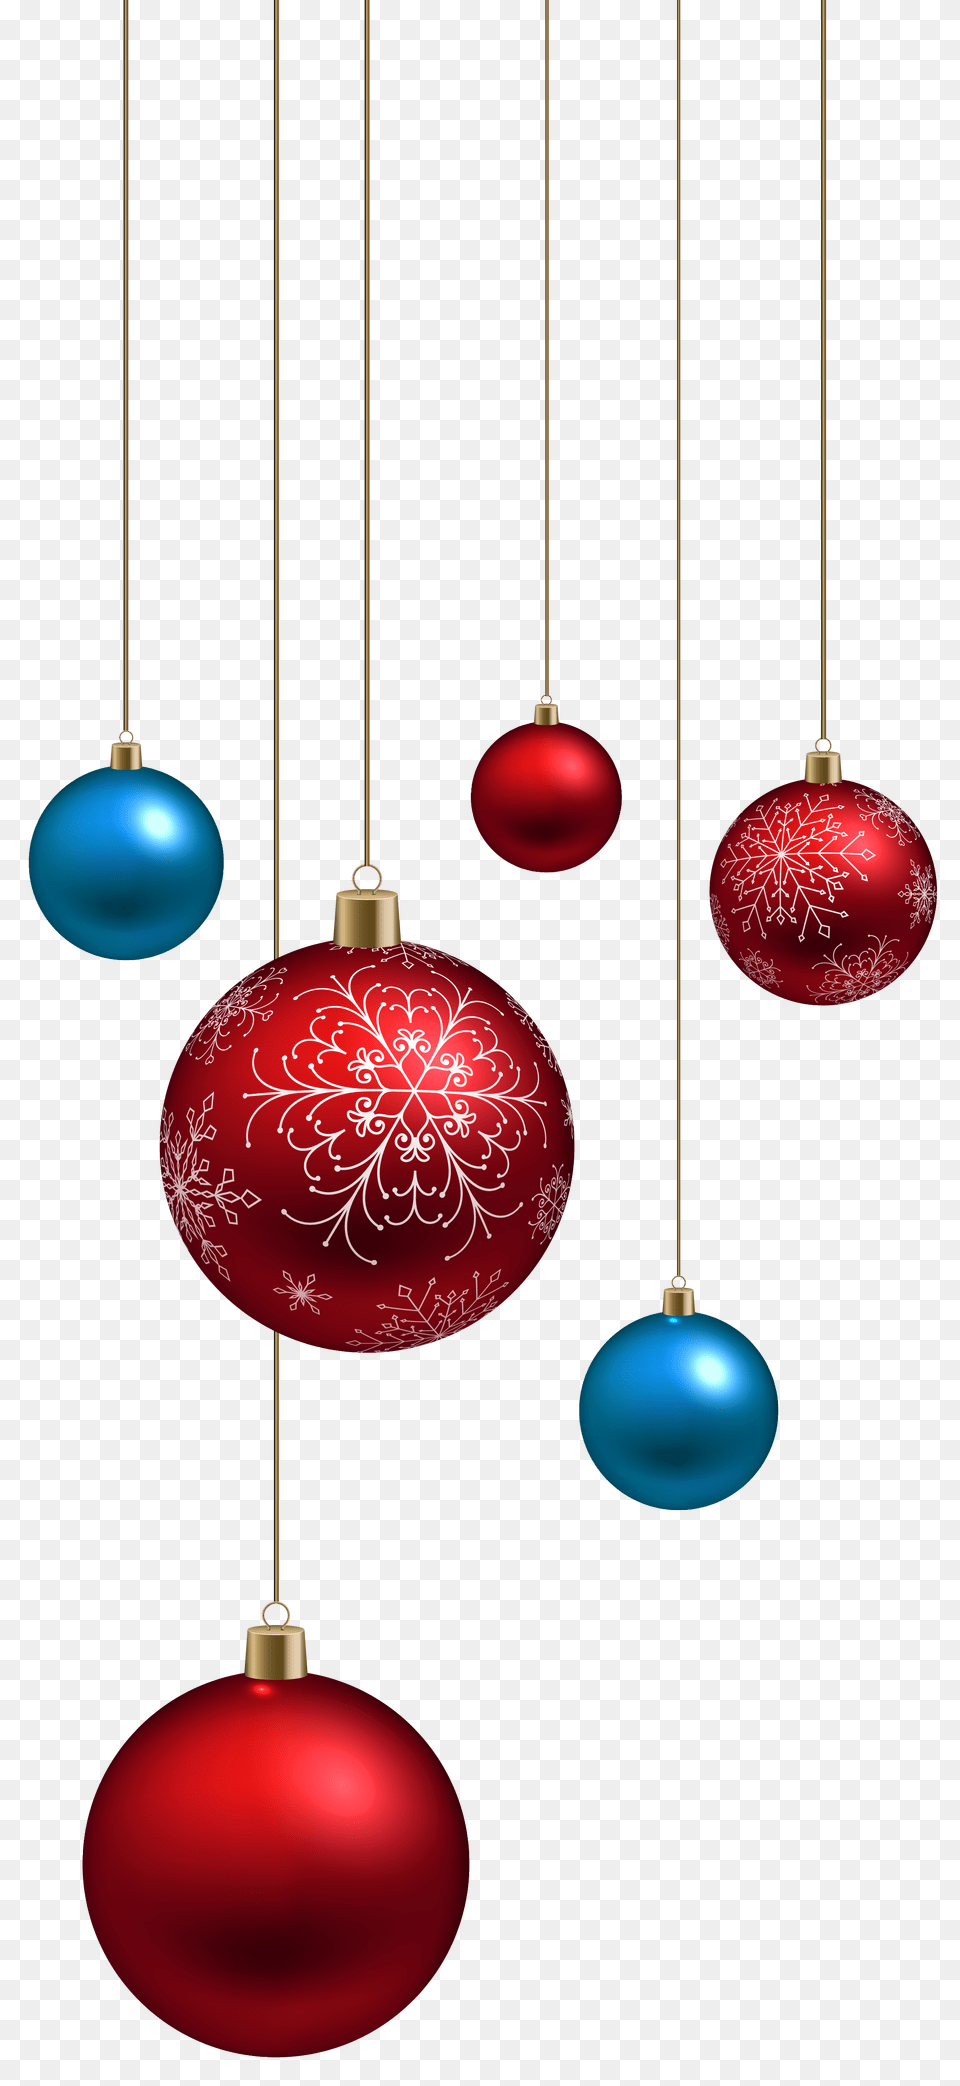 Hd Blue Glitter Christmas Ornaments Christmas Christmas Ball Ball Hanging Clipart, Lighting, Accessories, Lamp Png